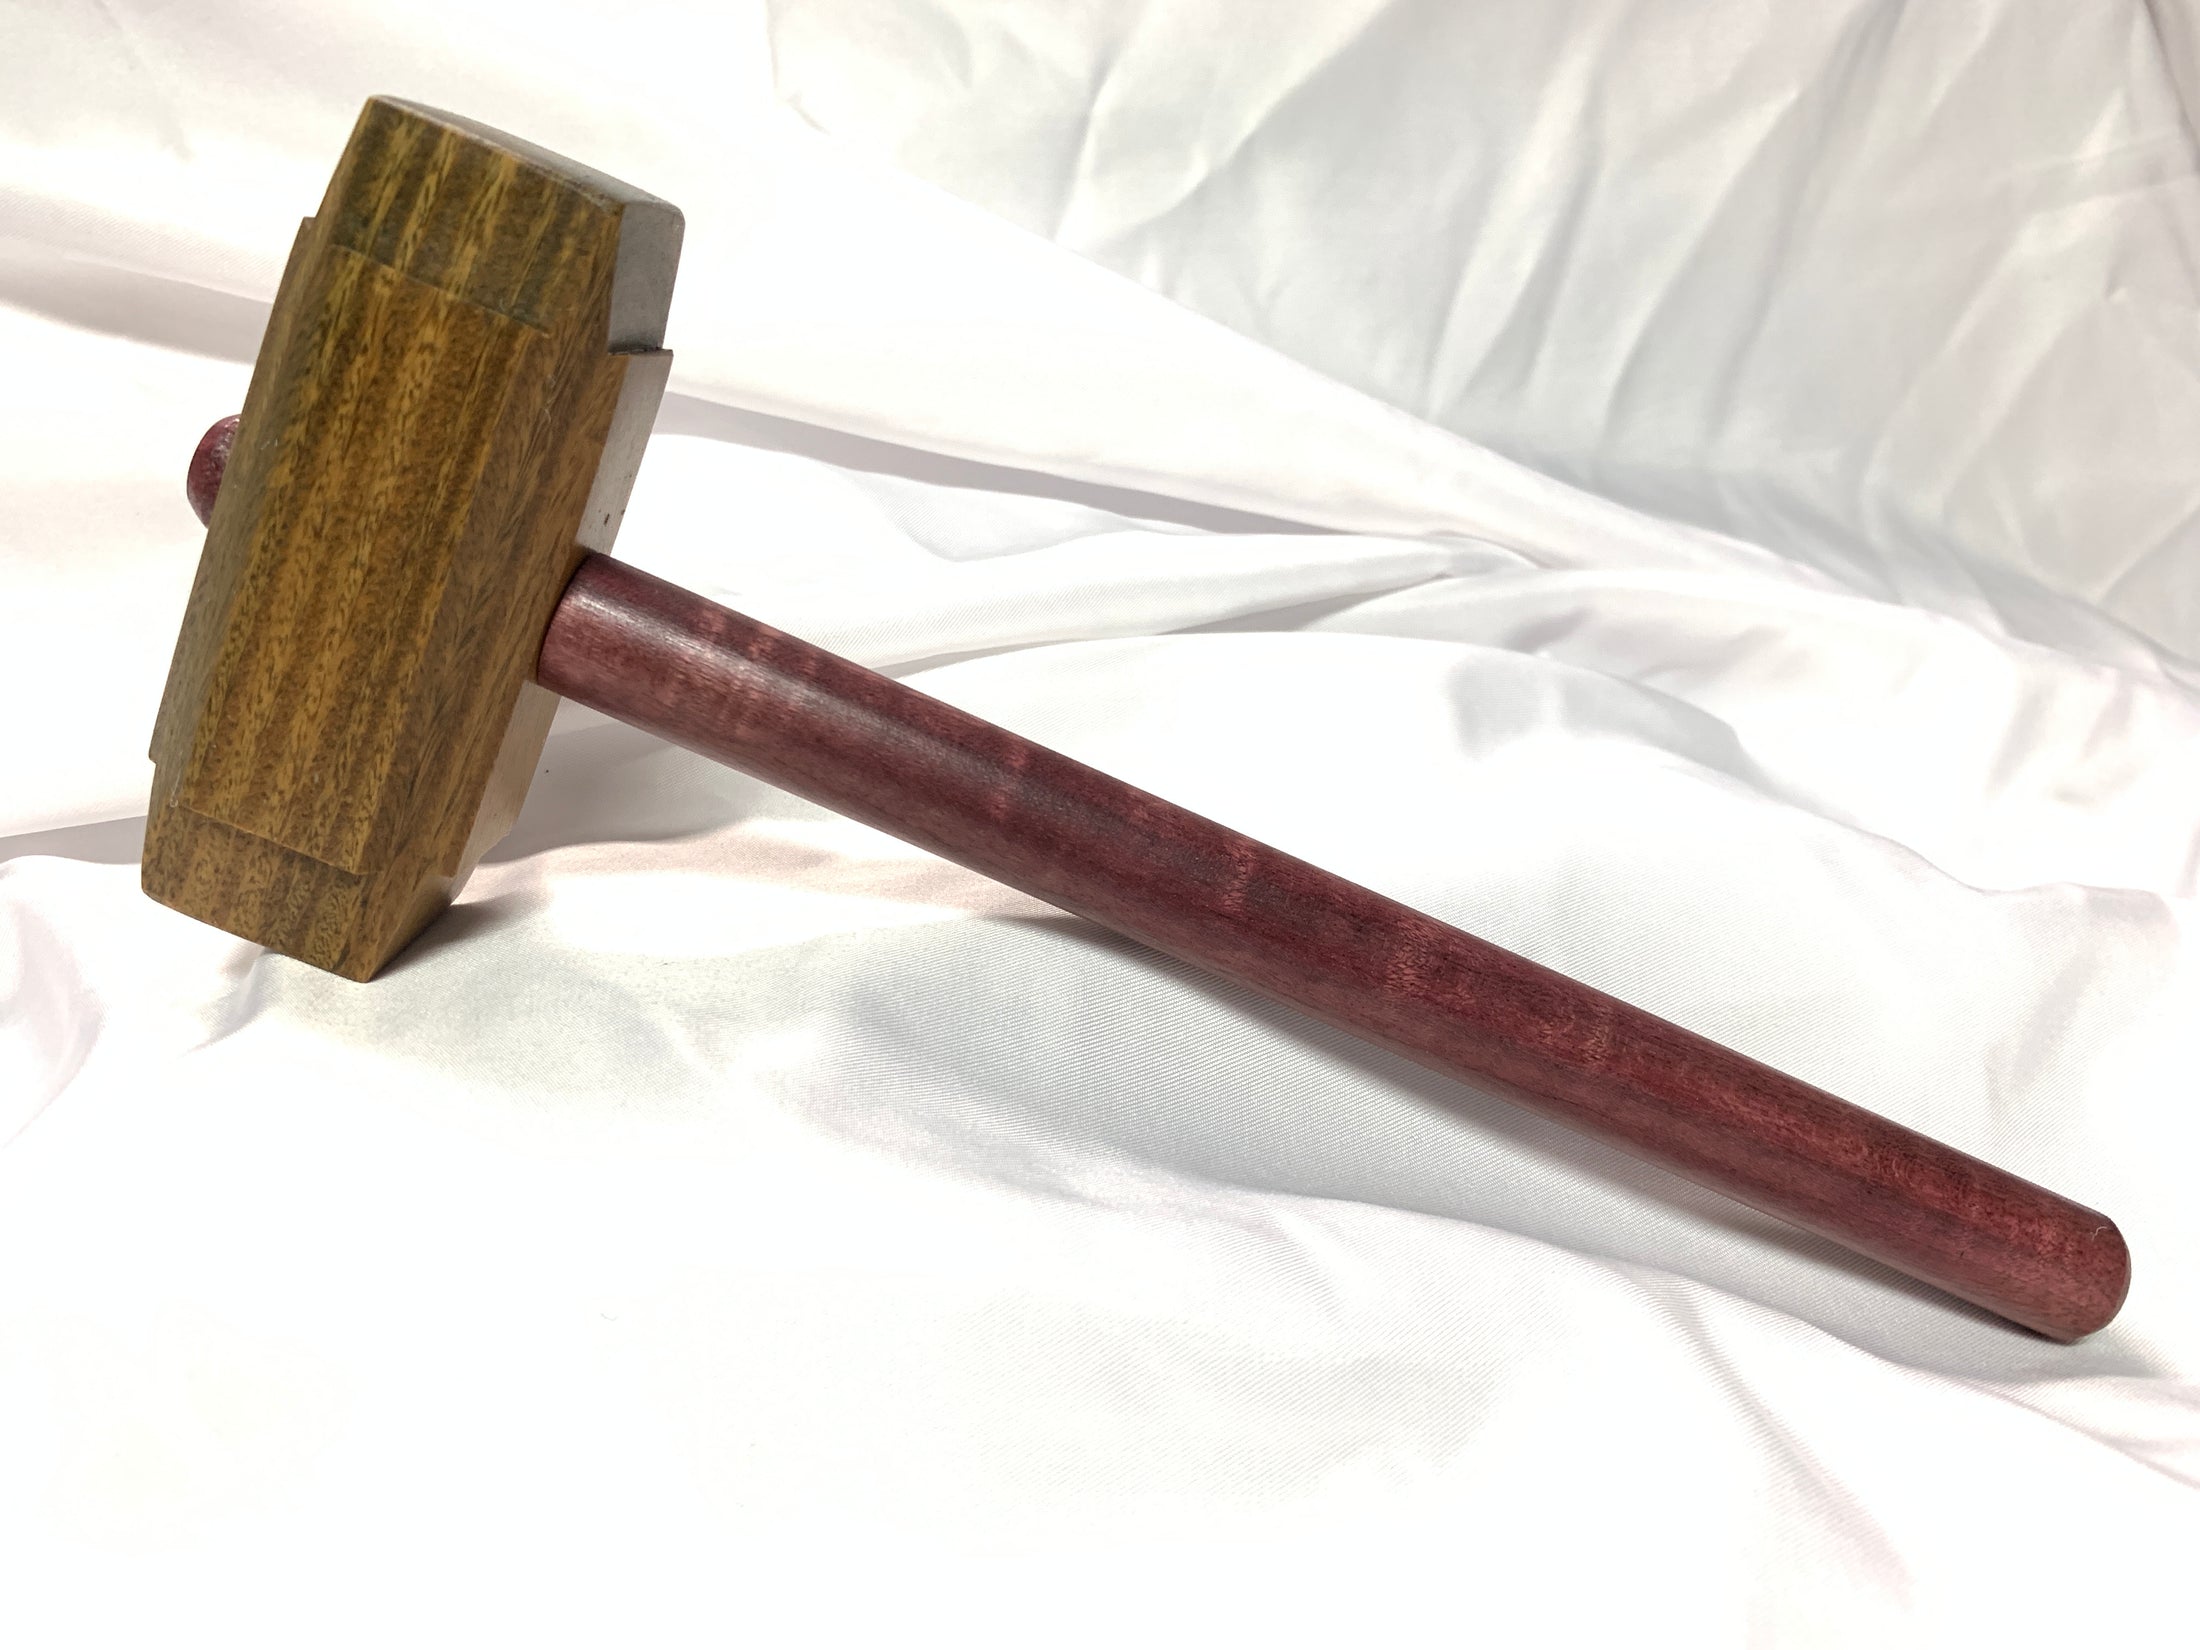 Thors Hammer Woodworking Mallet Lignum Vitae Head with Purpleheart Handle Kings Fine Woodworking